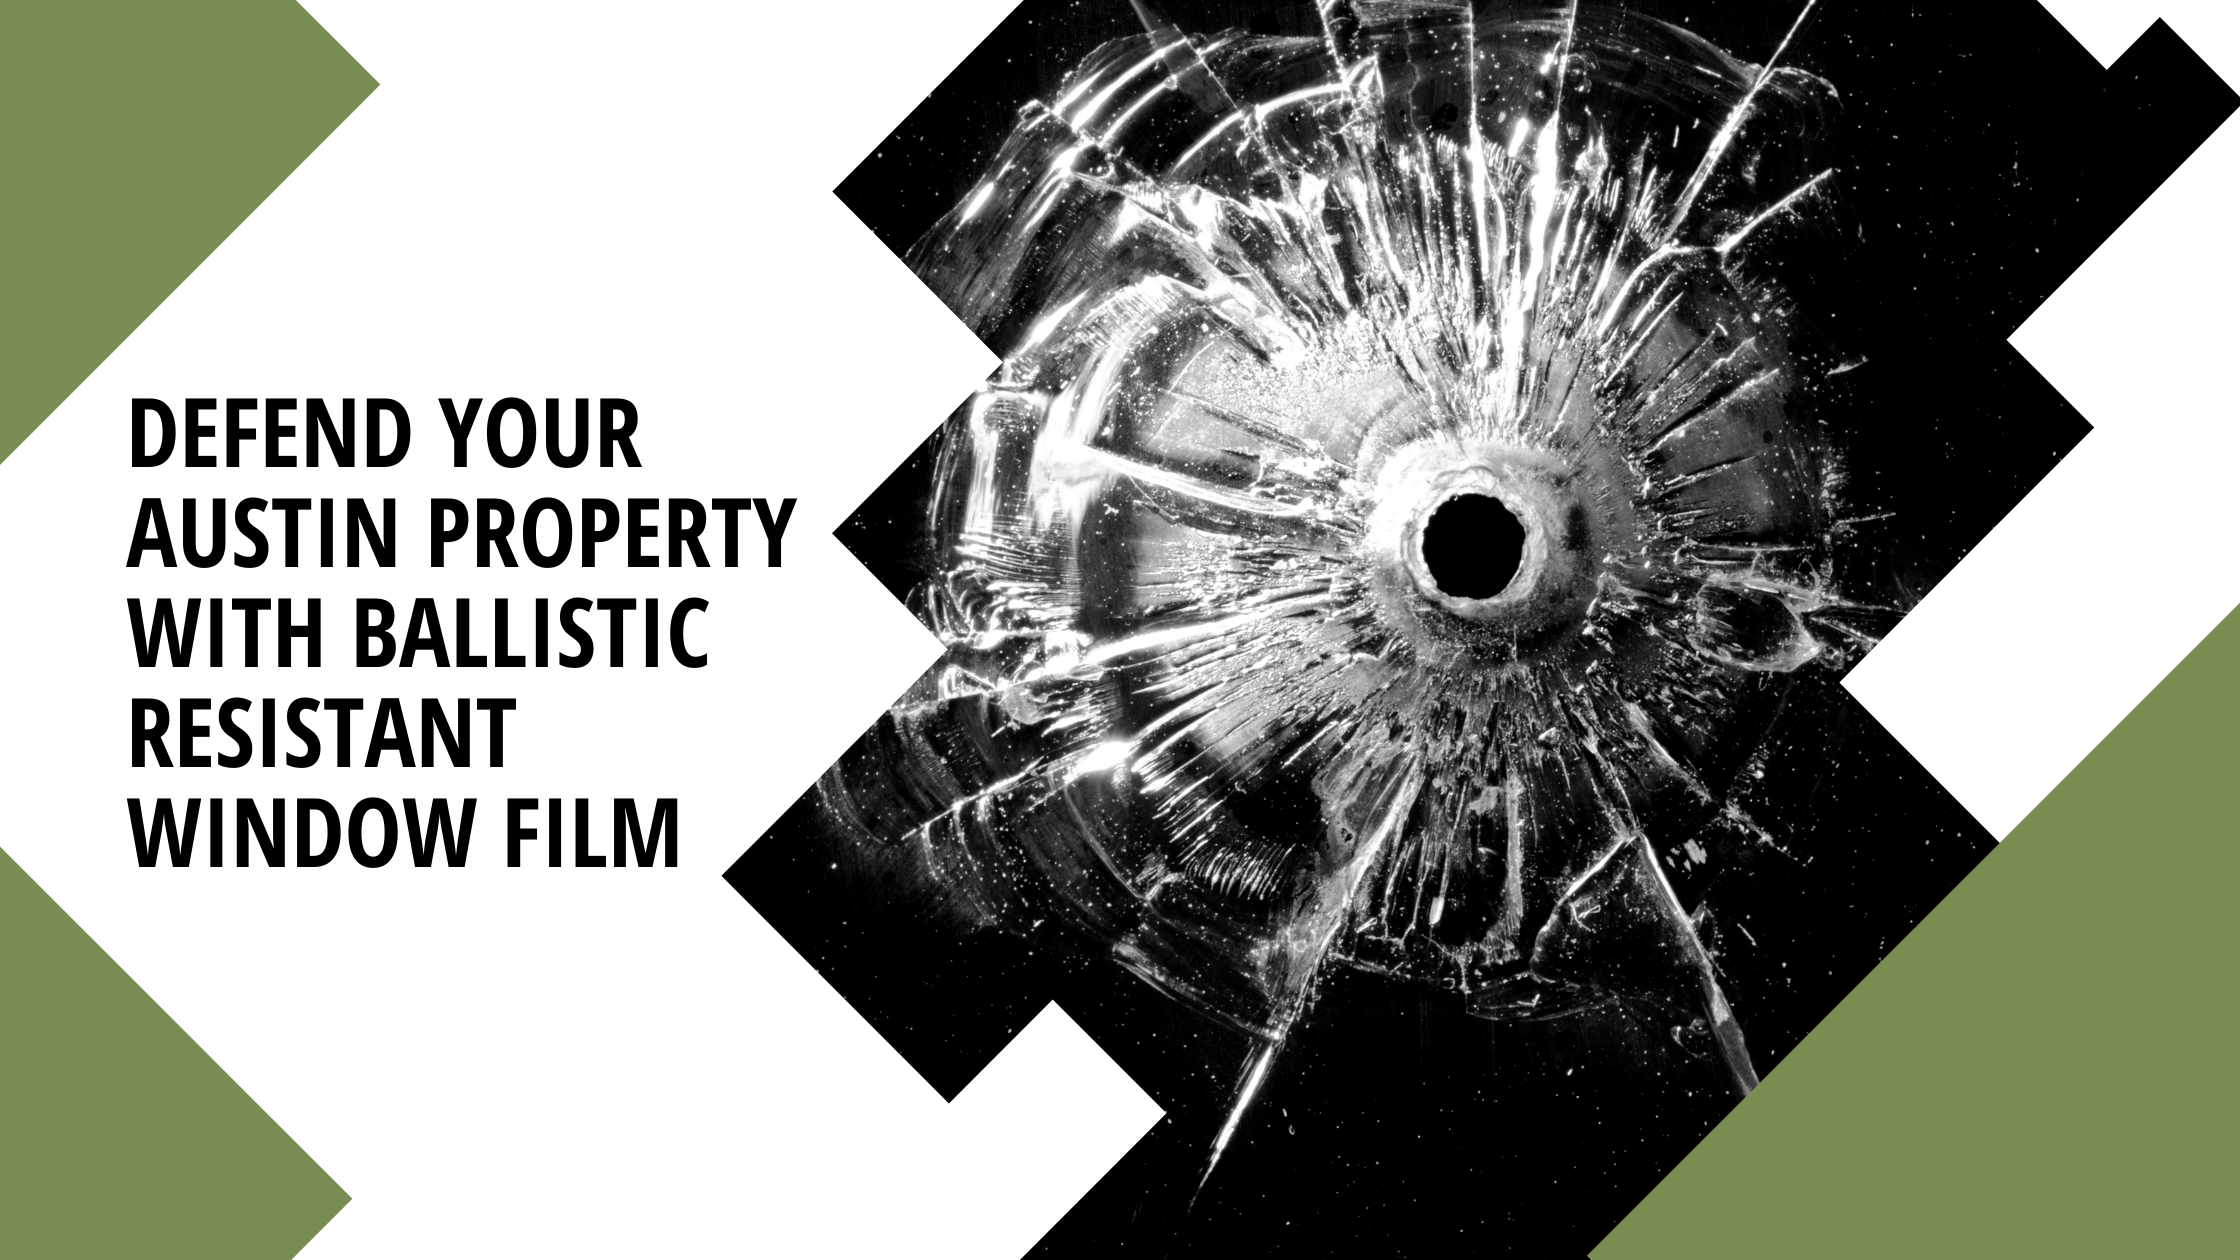 Defend Your Austin Property with Ballistic Resistant Window Film